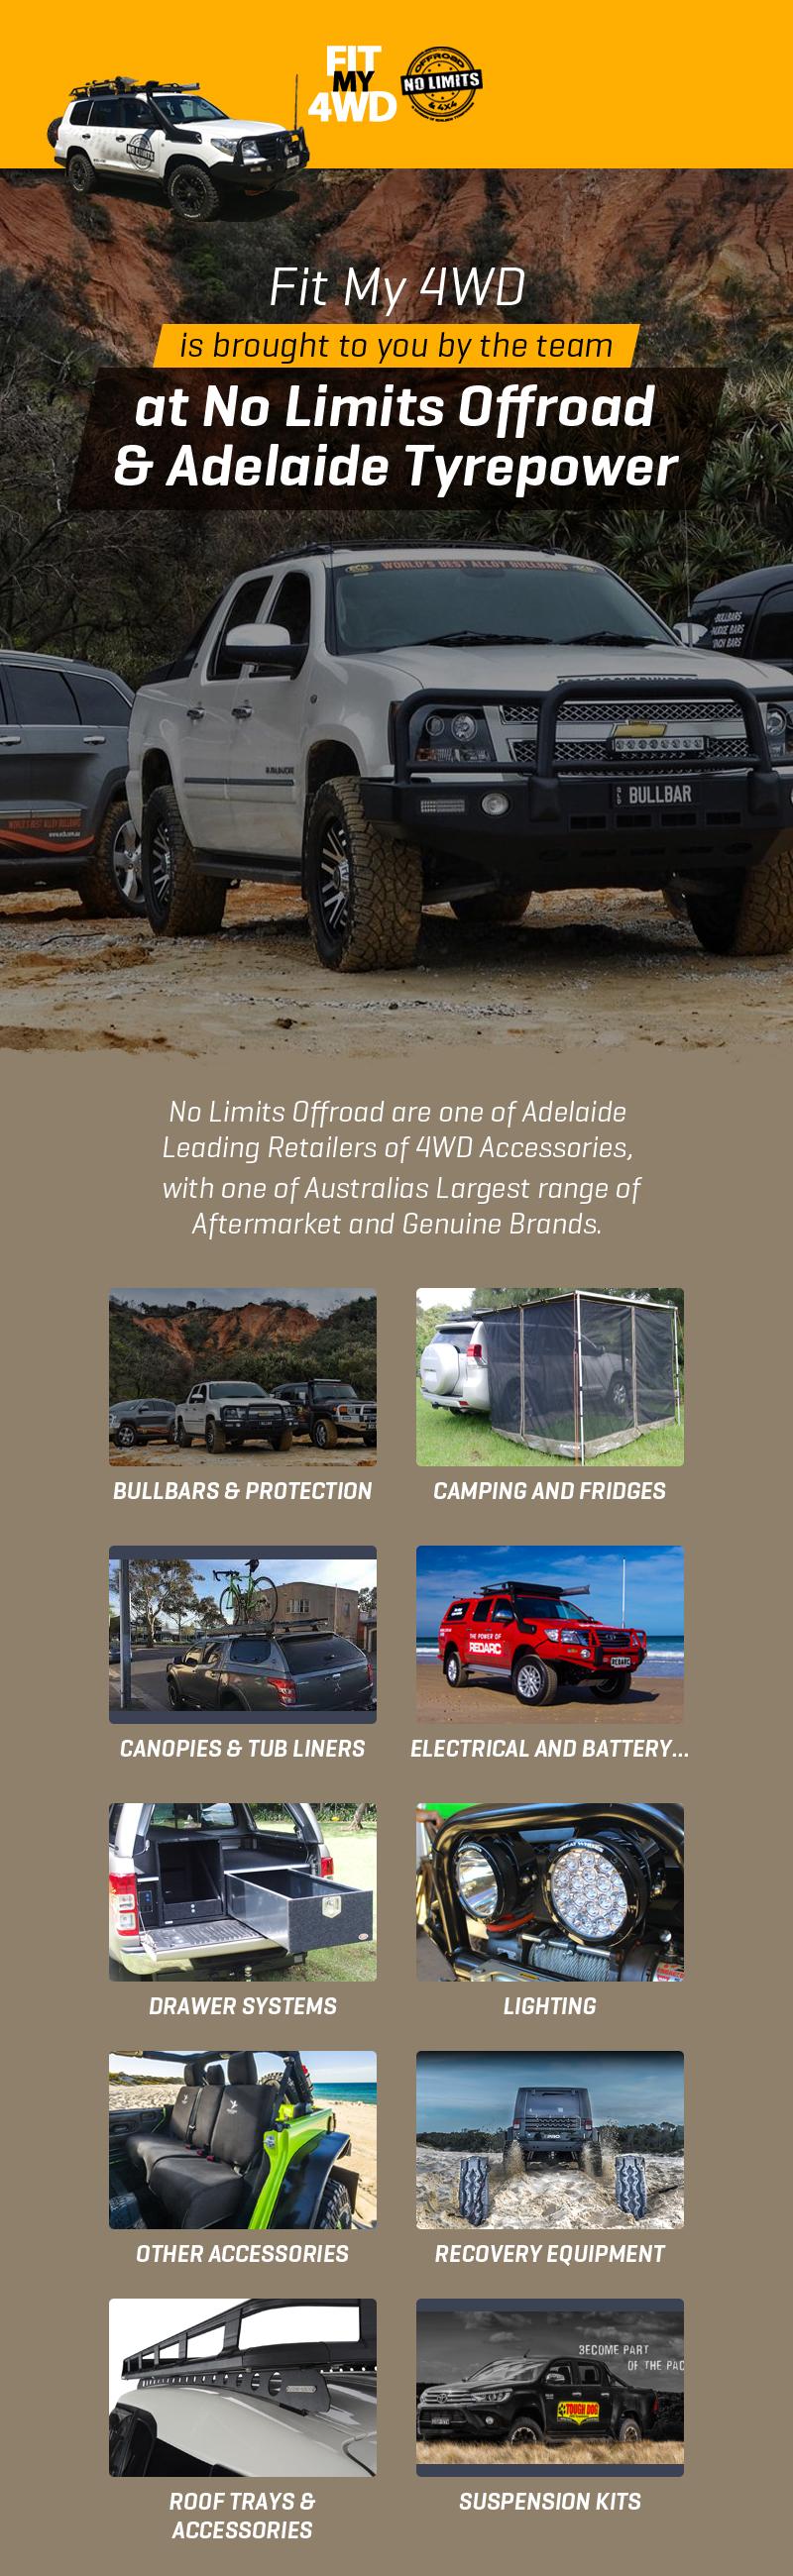 Fit My 4wd – A Leading Retailer of 4WD Accessories